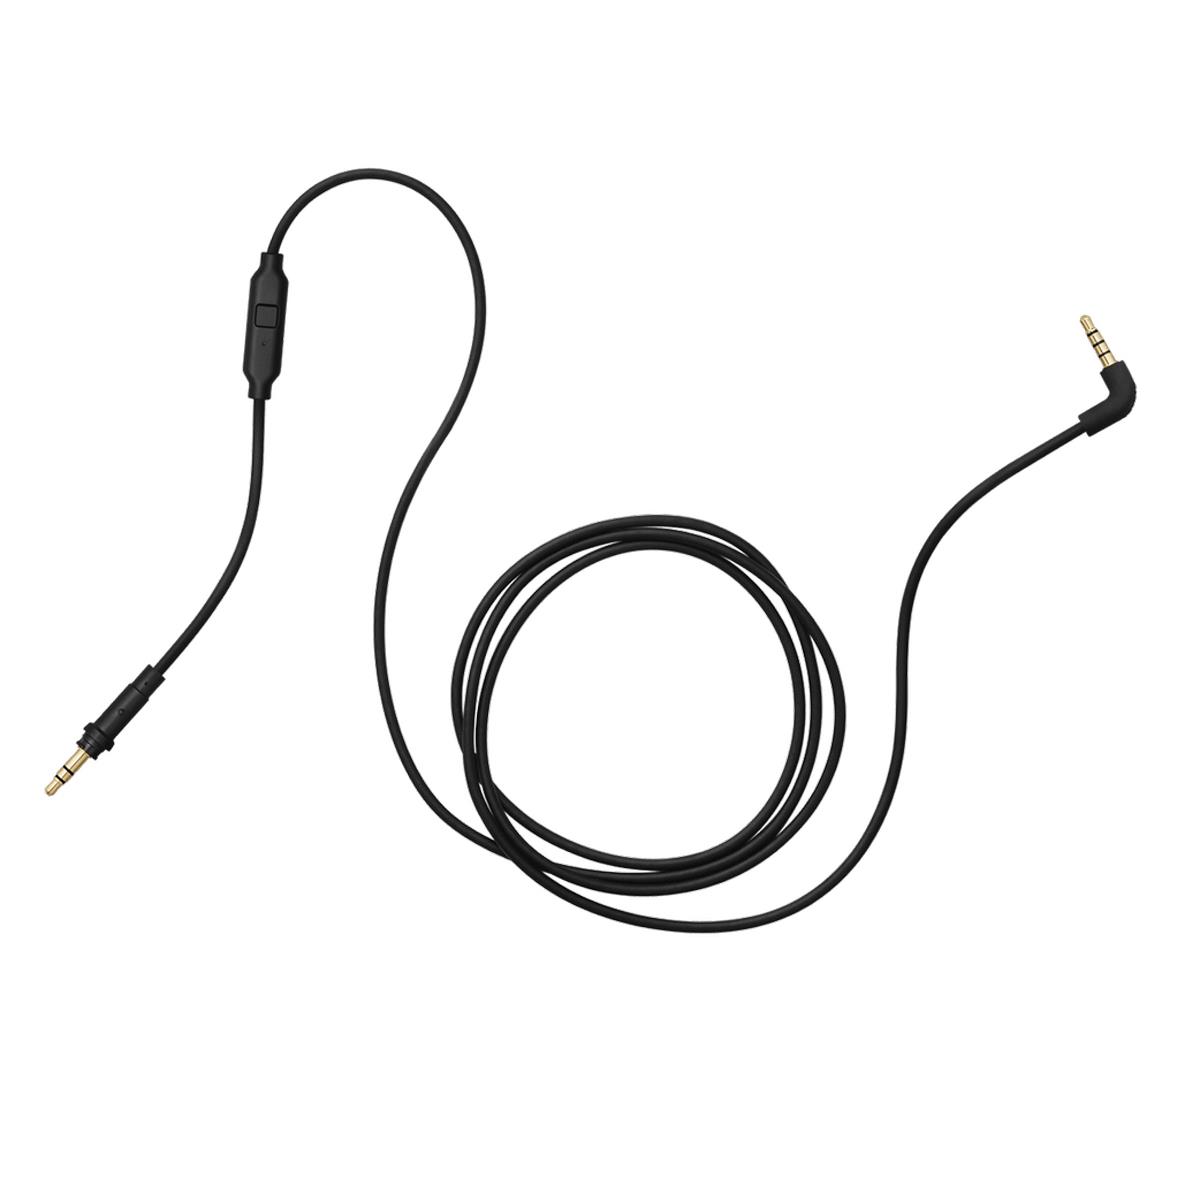 Image of AIAIAI C01 3.93' Straight Cable w/One Button Remote and Inline Microphone